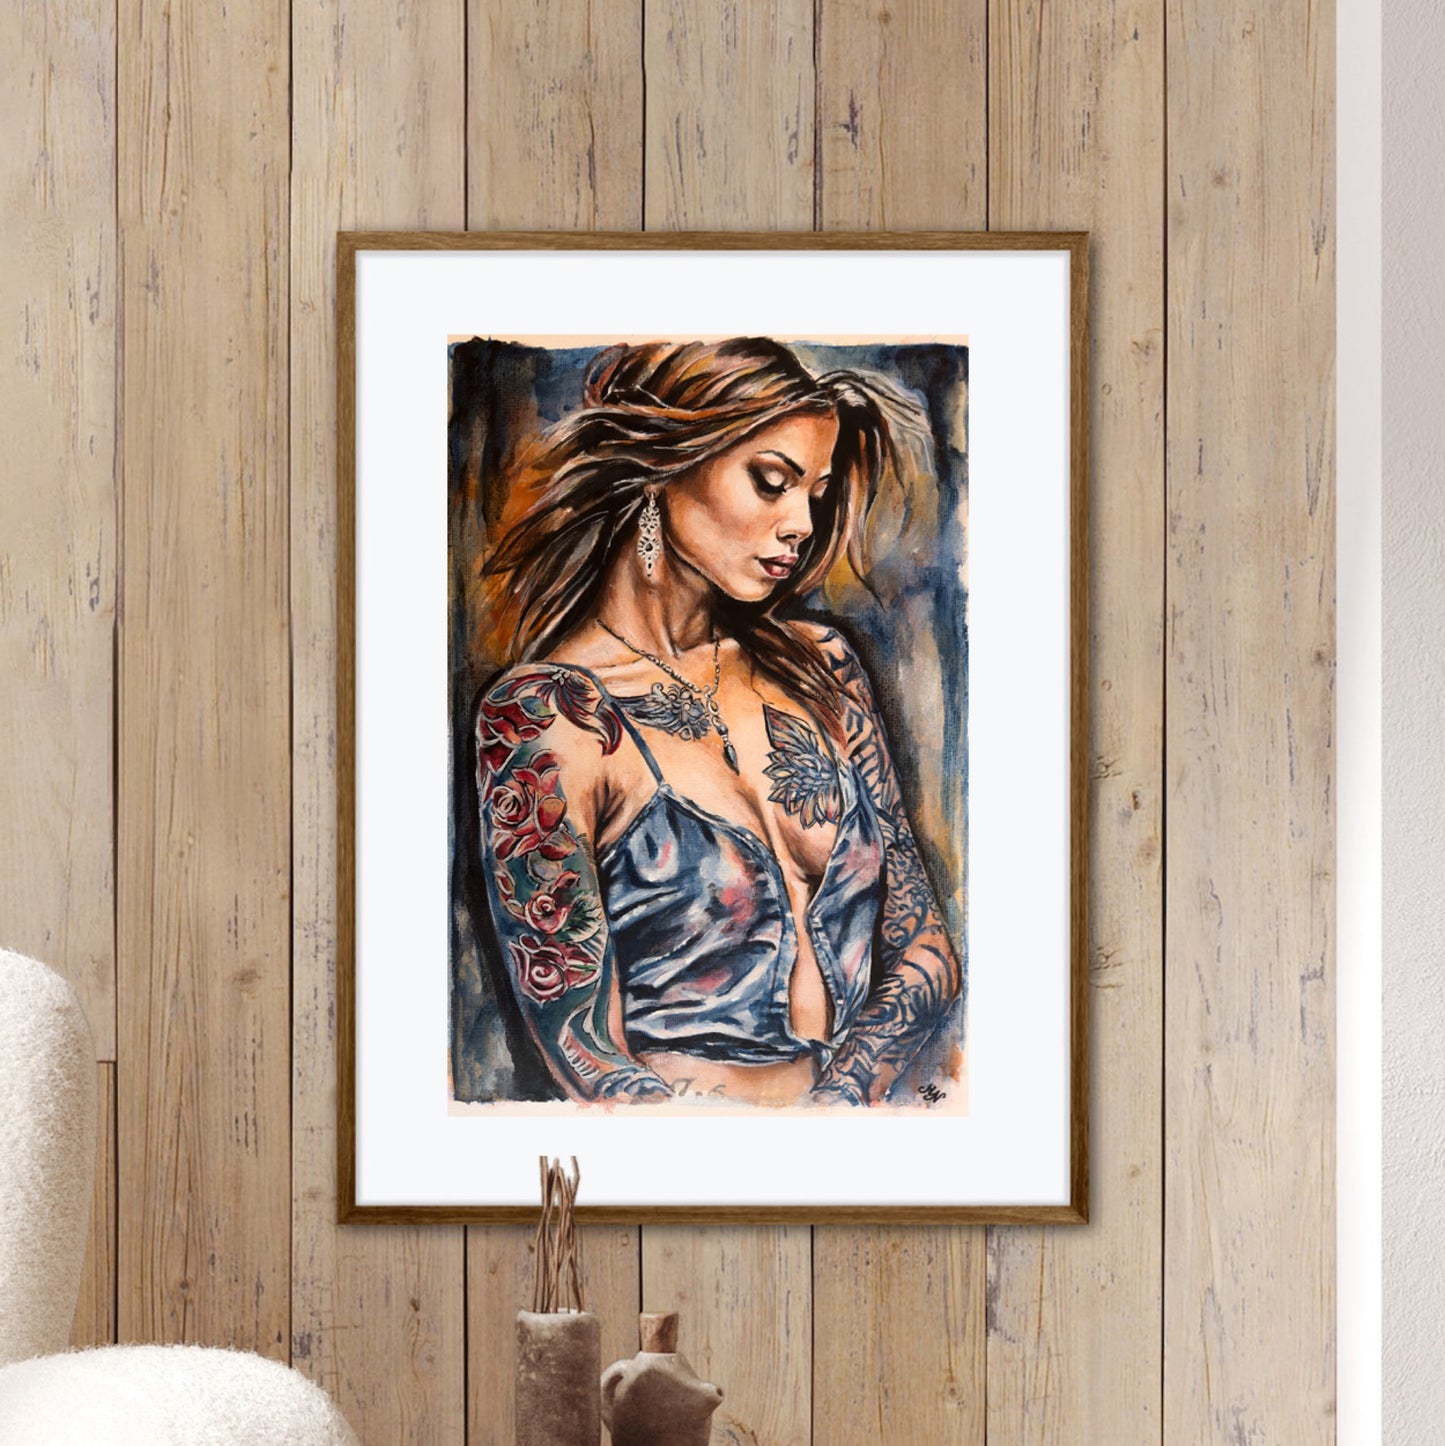 Artistic portrayal of a girl with intricate body art